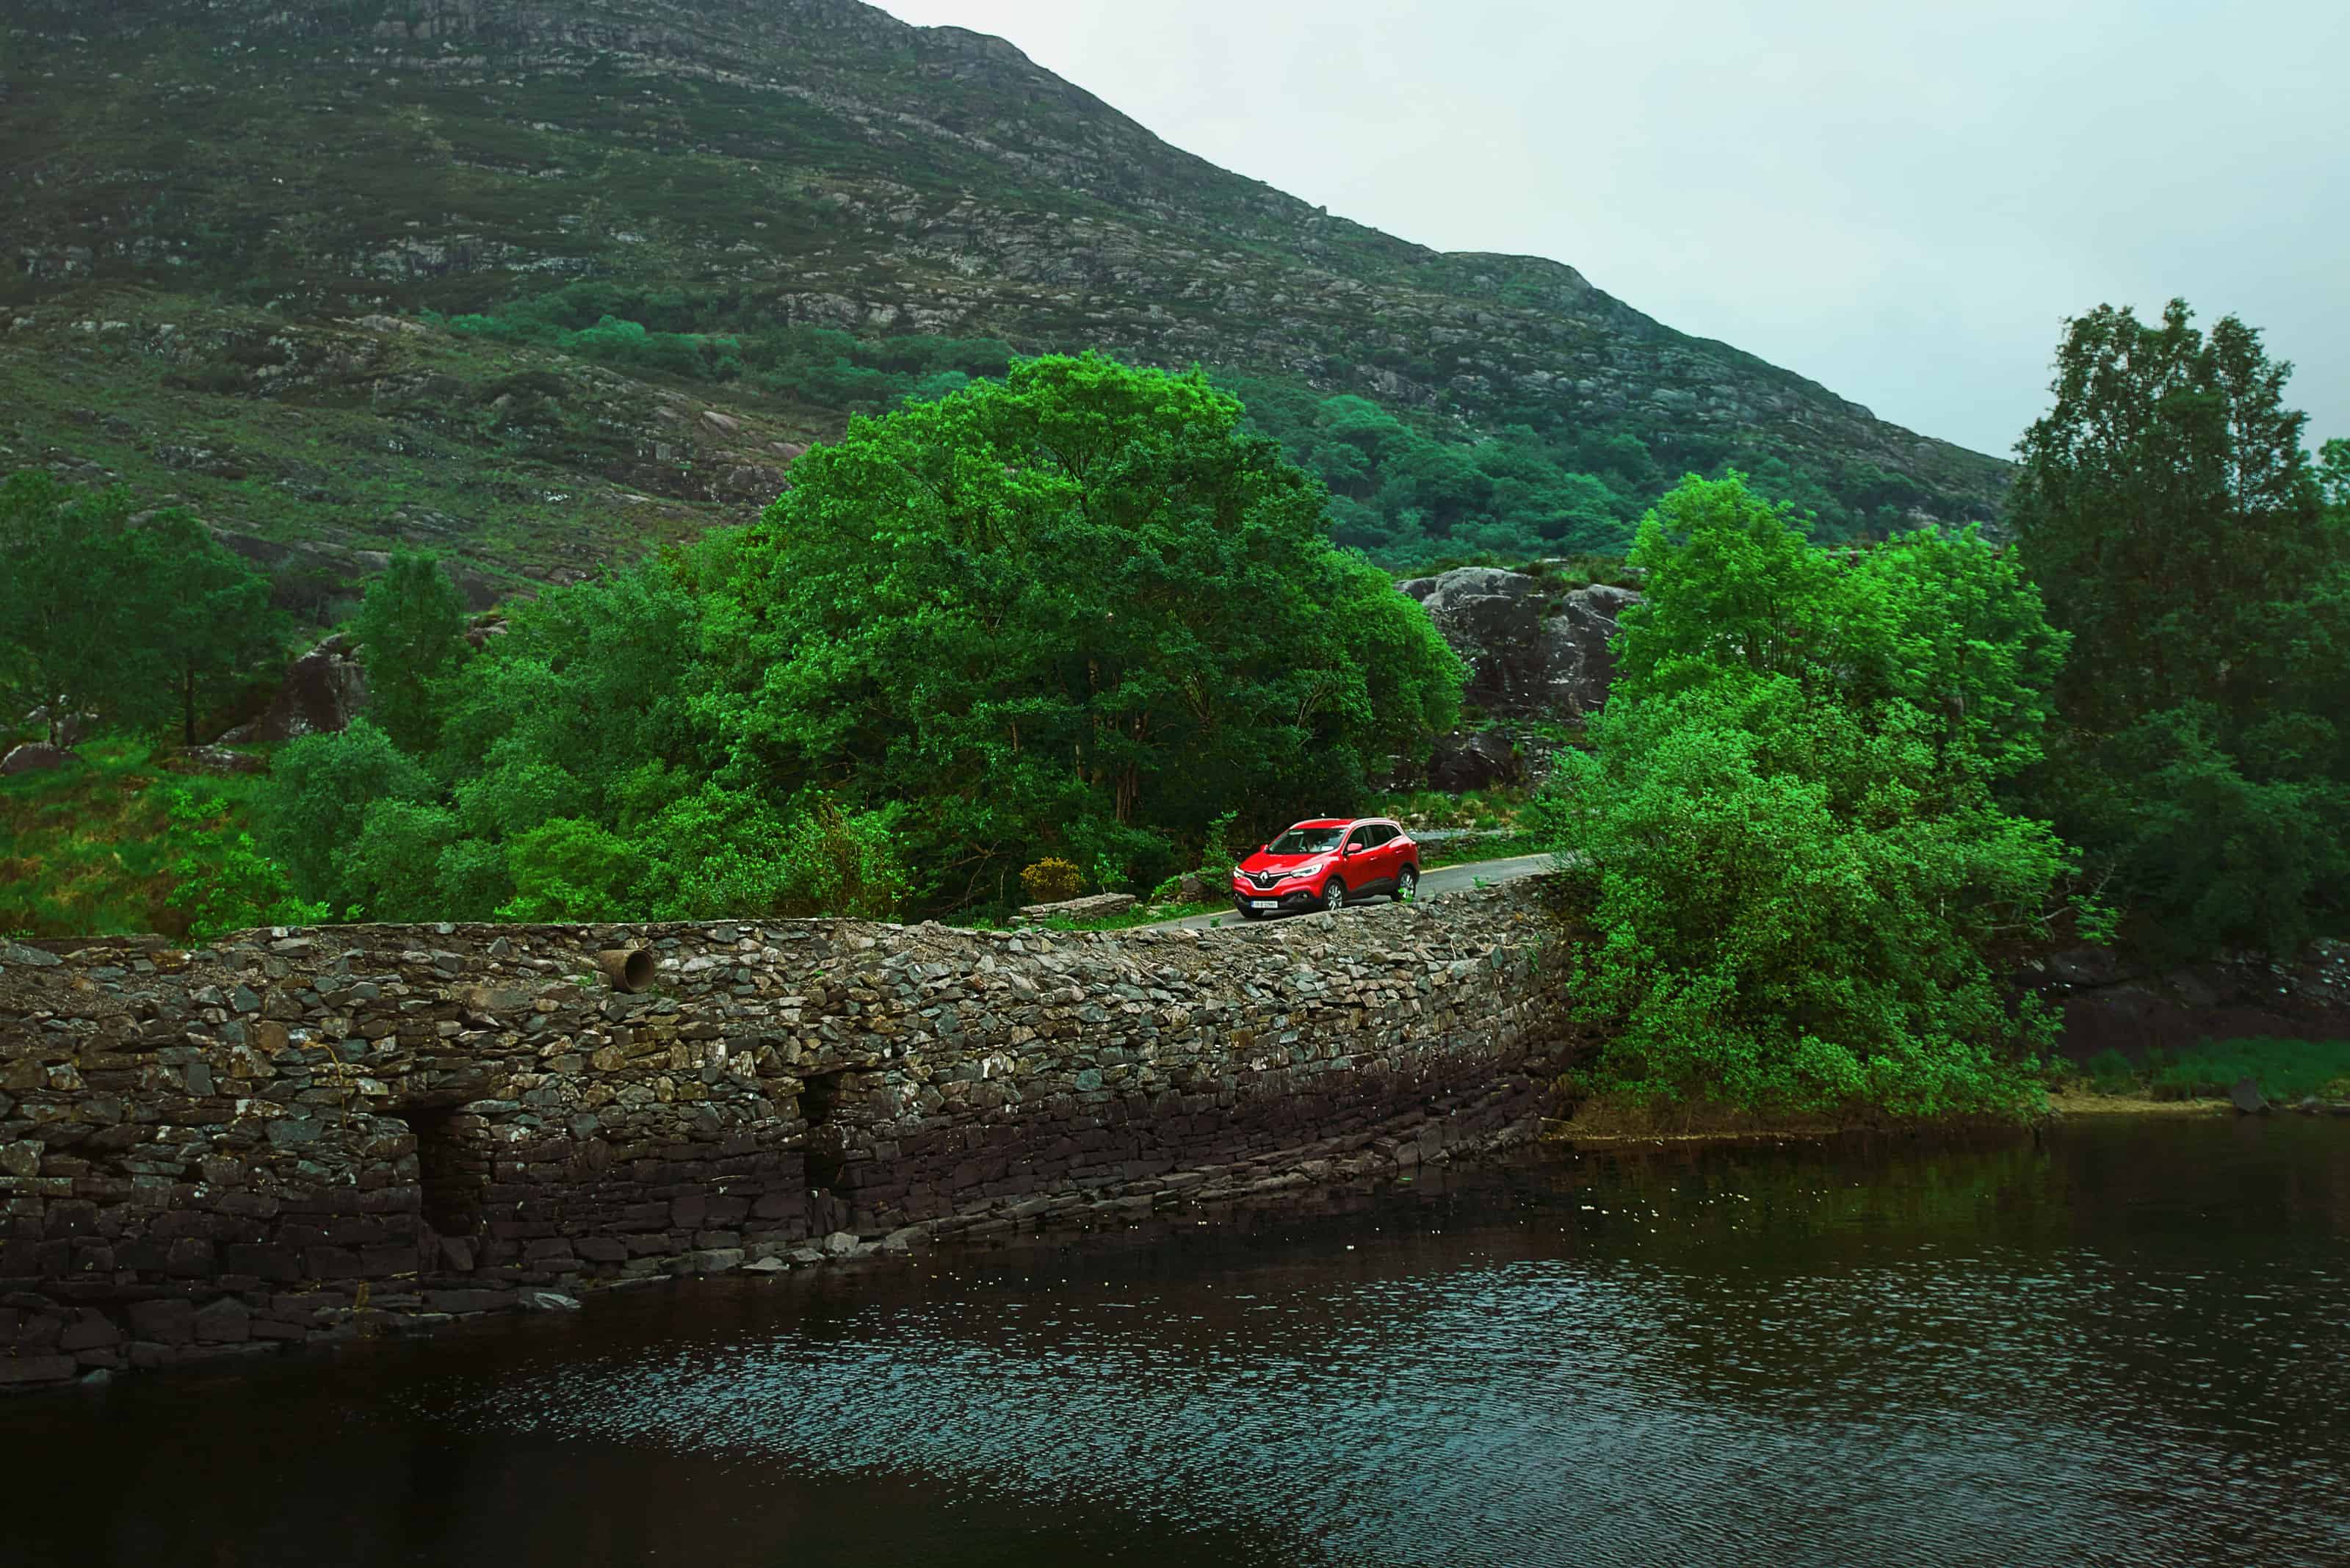 Driving On The Emerald Isle: Europcar Ireland Review 